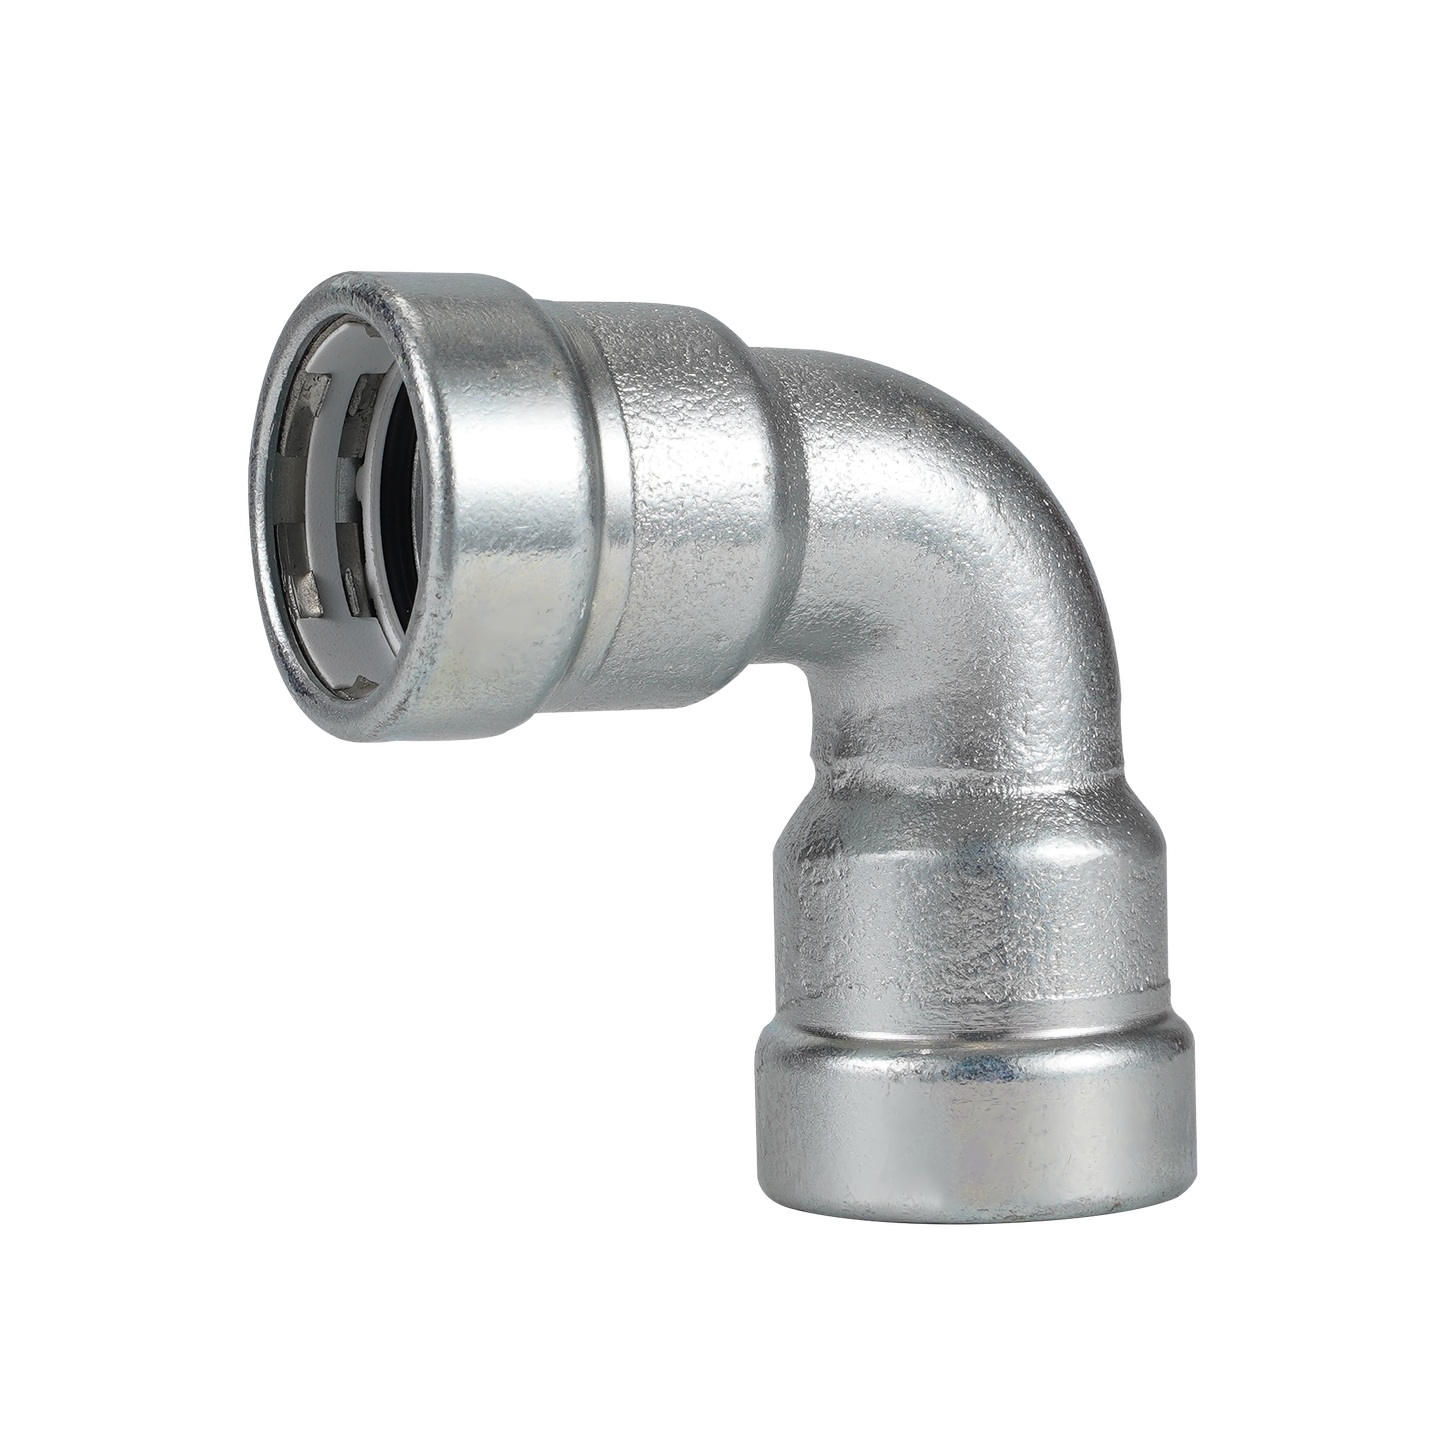 LC-Press Carbon steel Press fittings for thick-wall steel pipe, 90° Elbow, 3/4x3/4 inch PxP